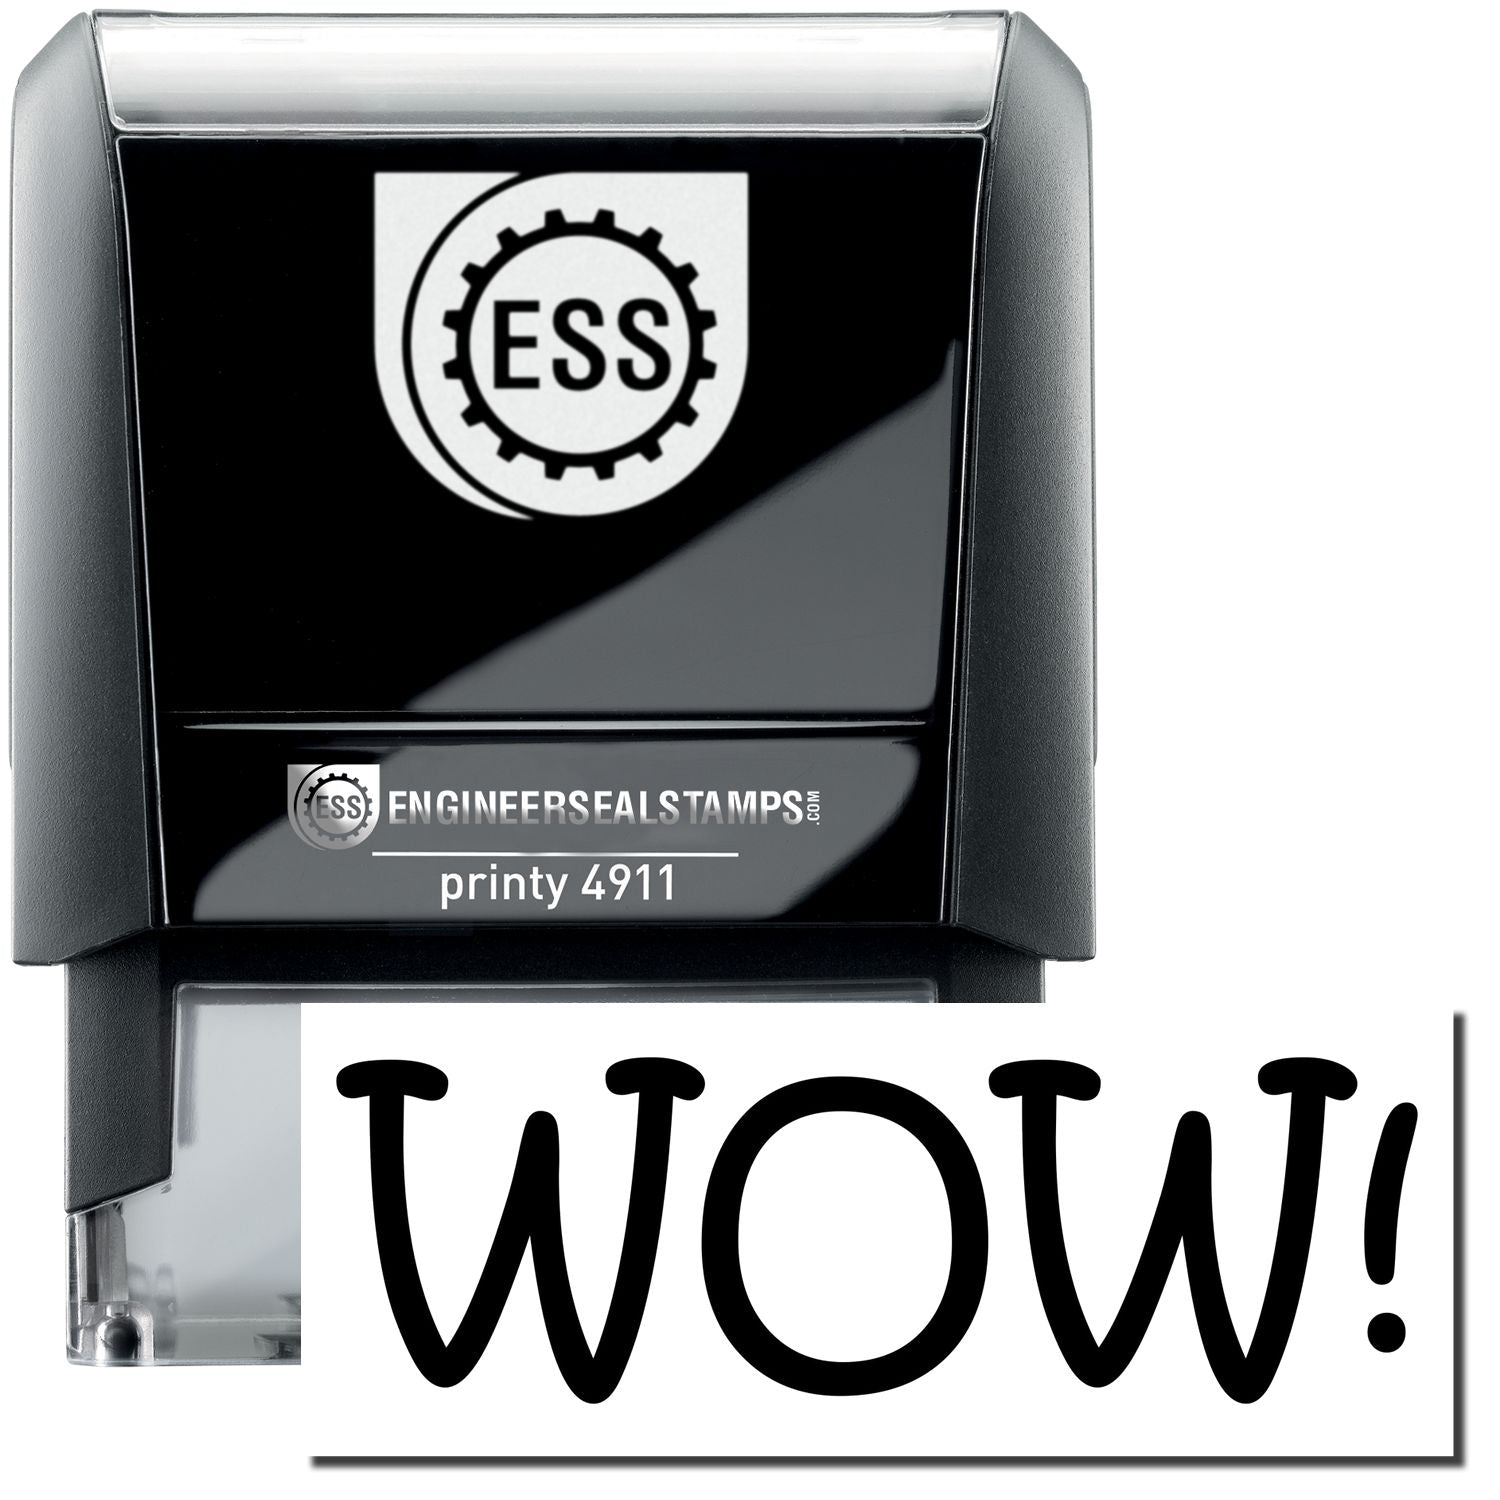 A self-inking stamp with a stamped image showing how the text "WOW!" is displayed after stamping.